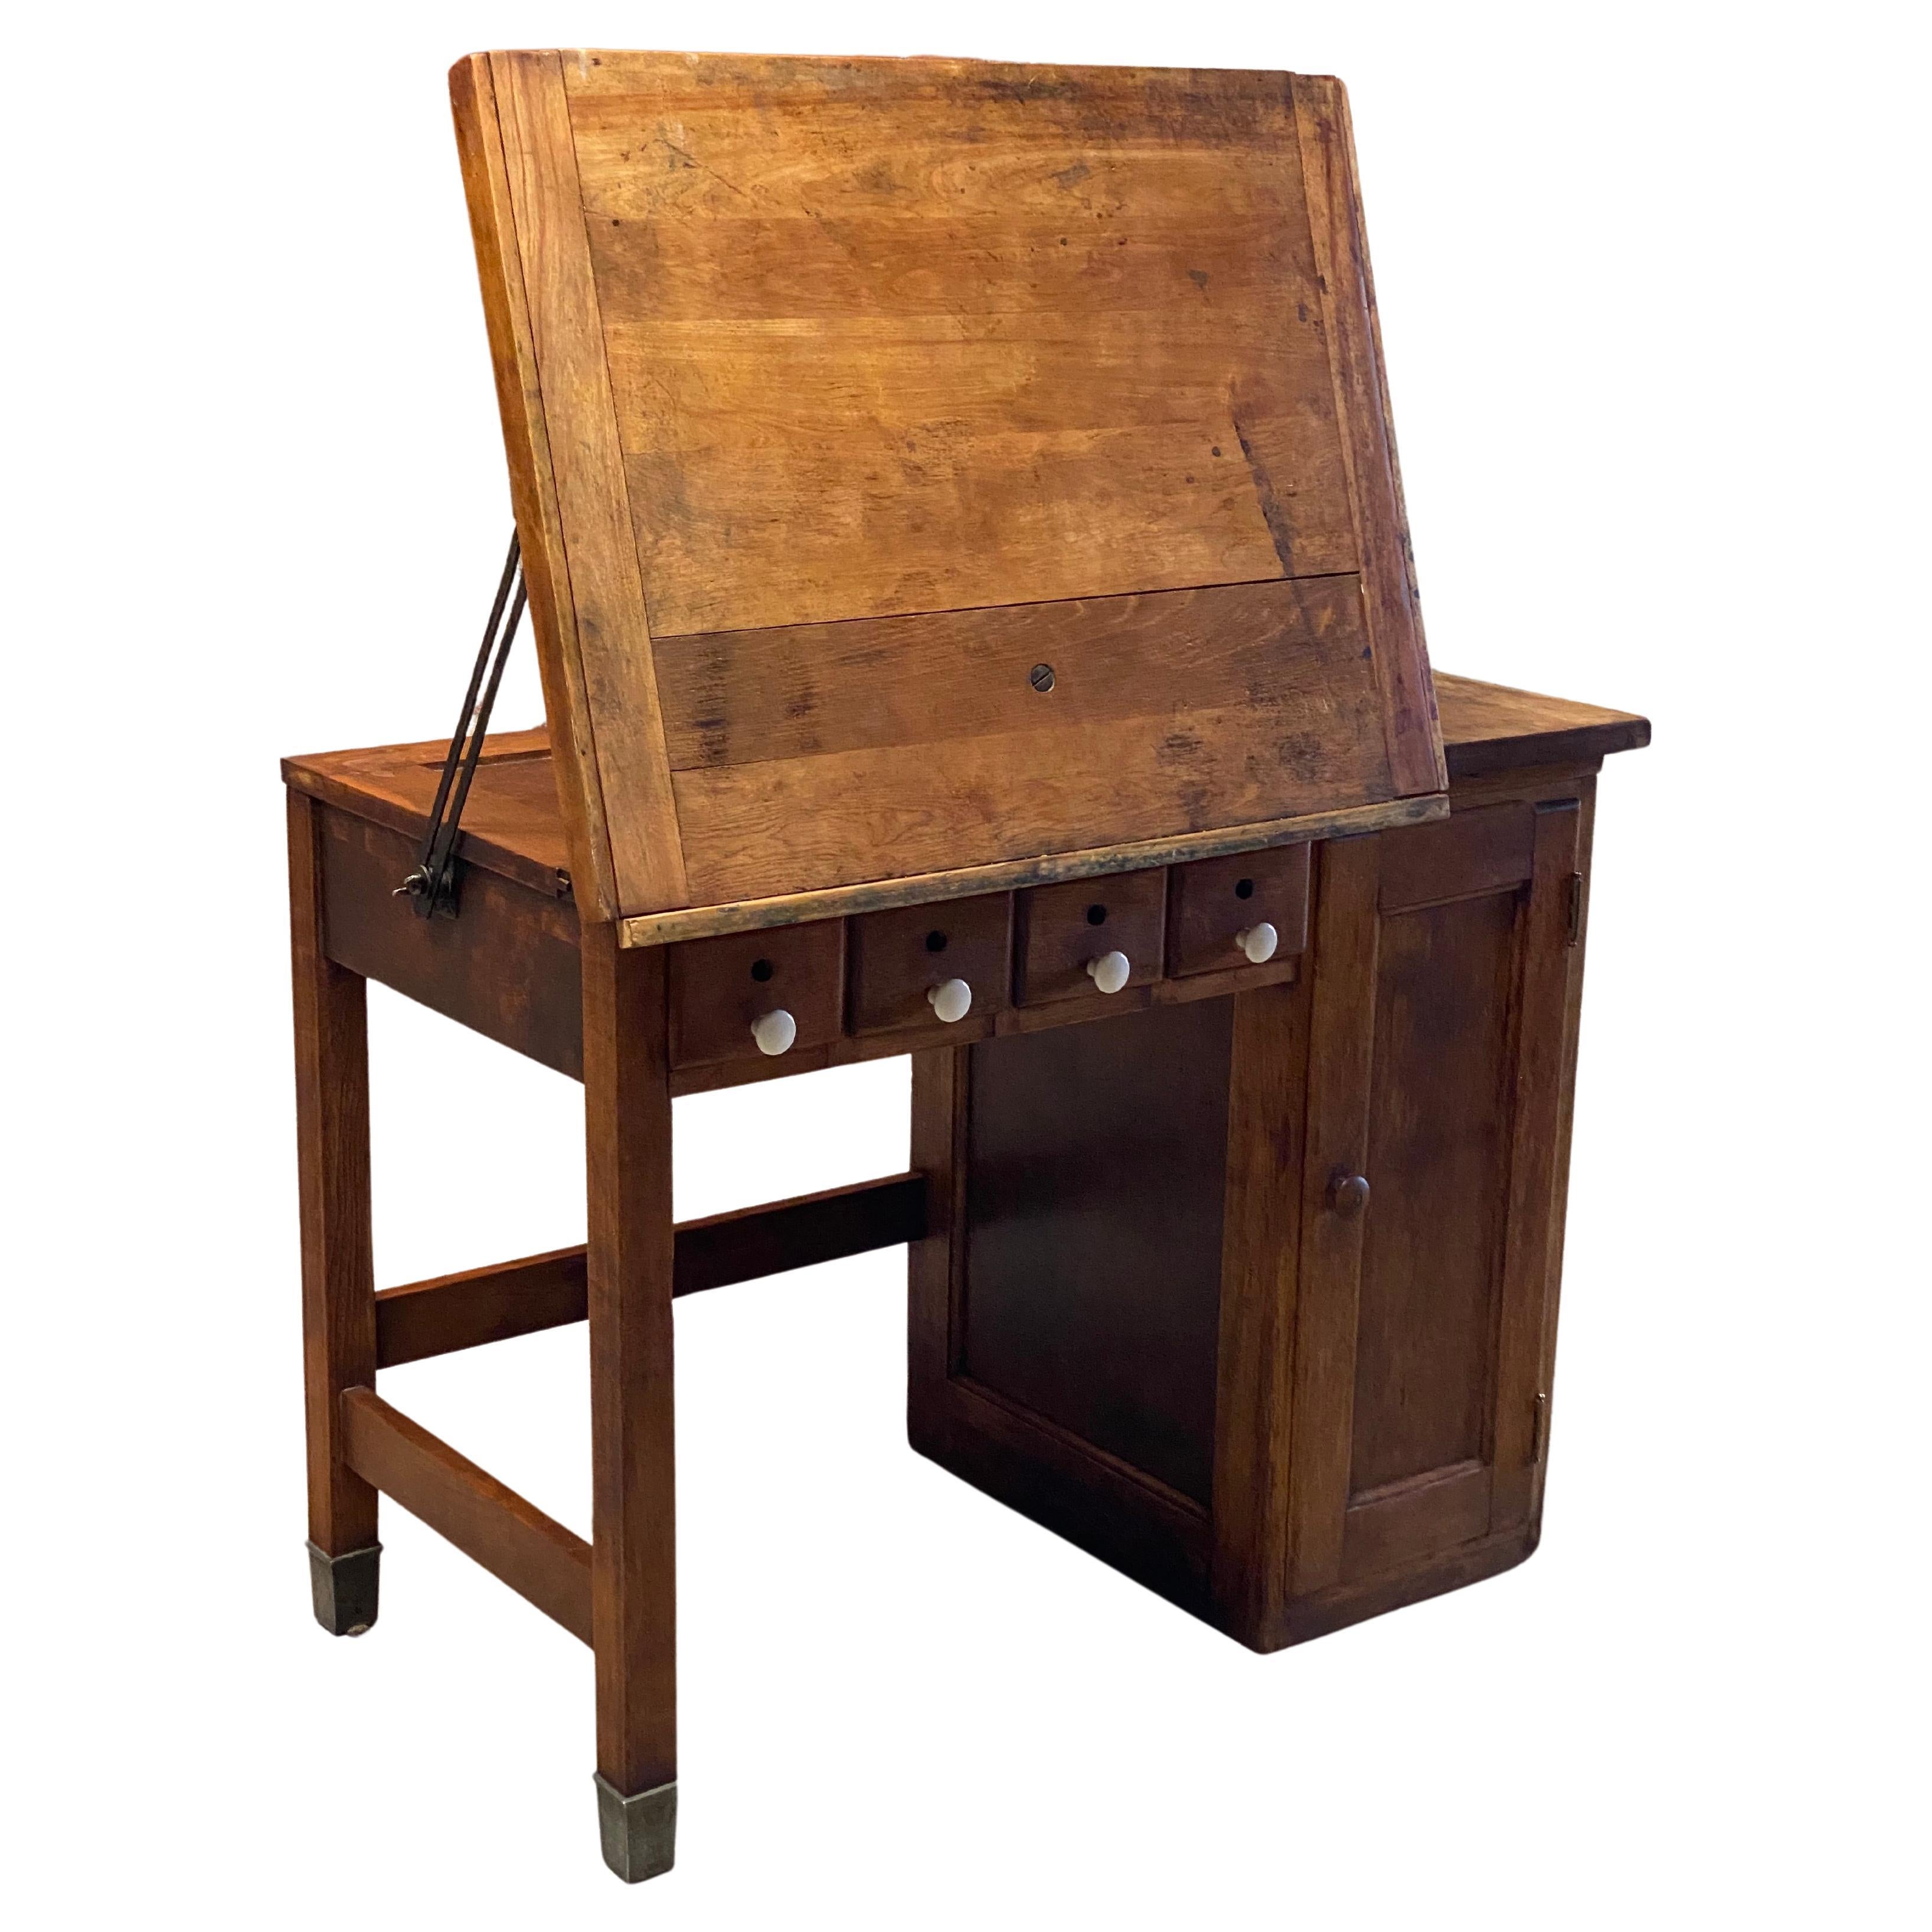 1930s Small Scale Industrial Drafting Table For Sale